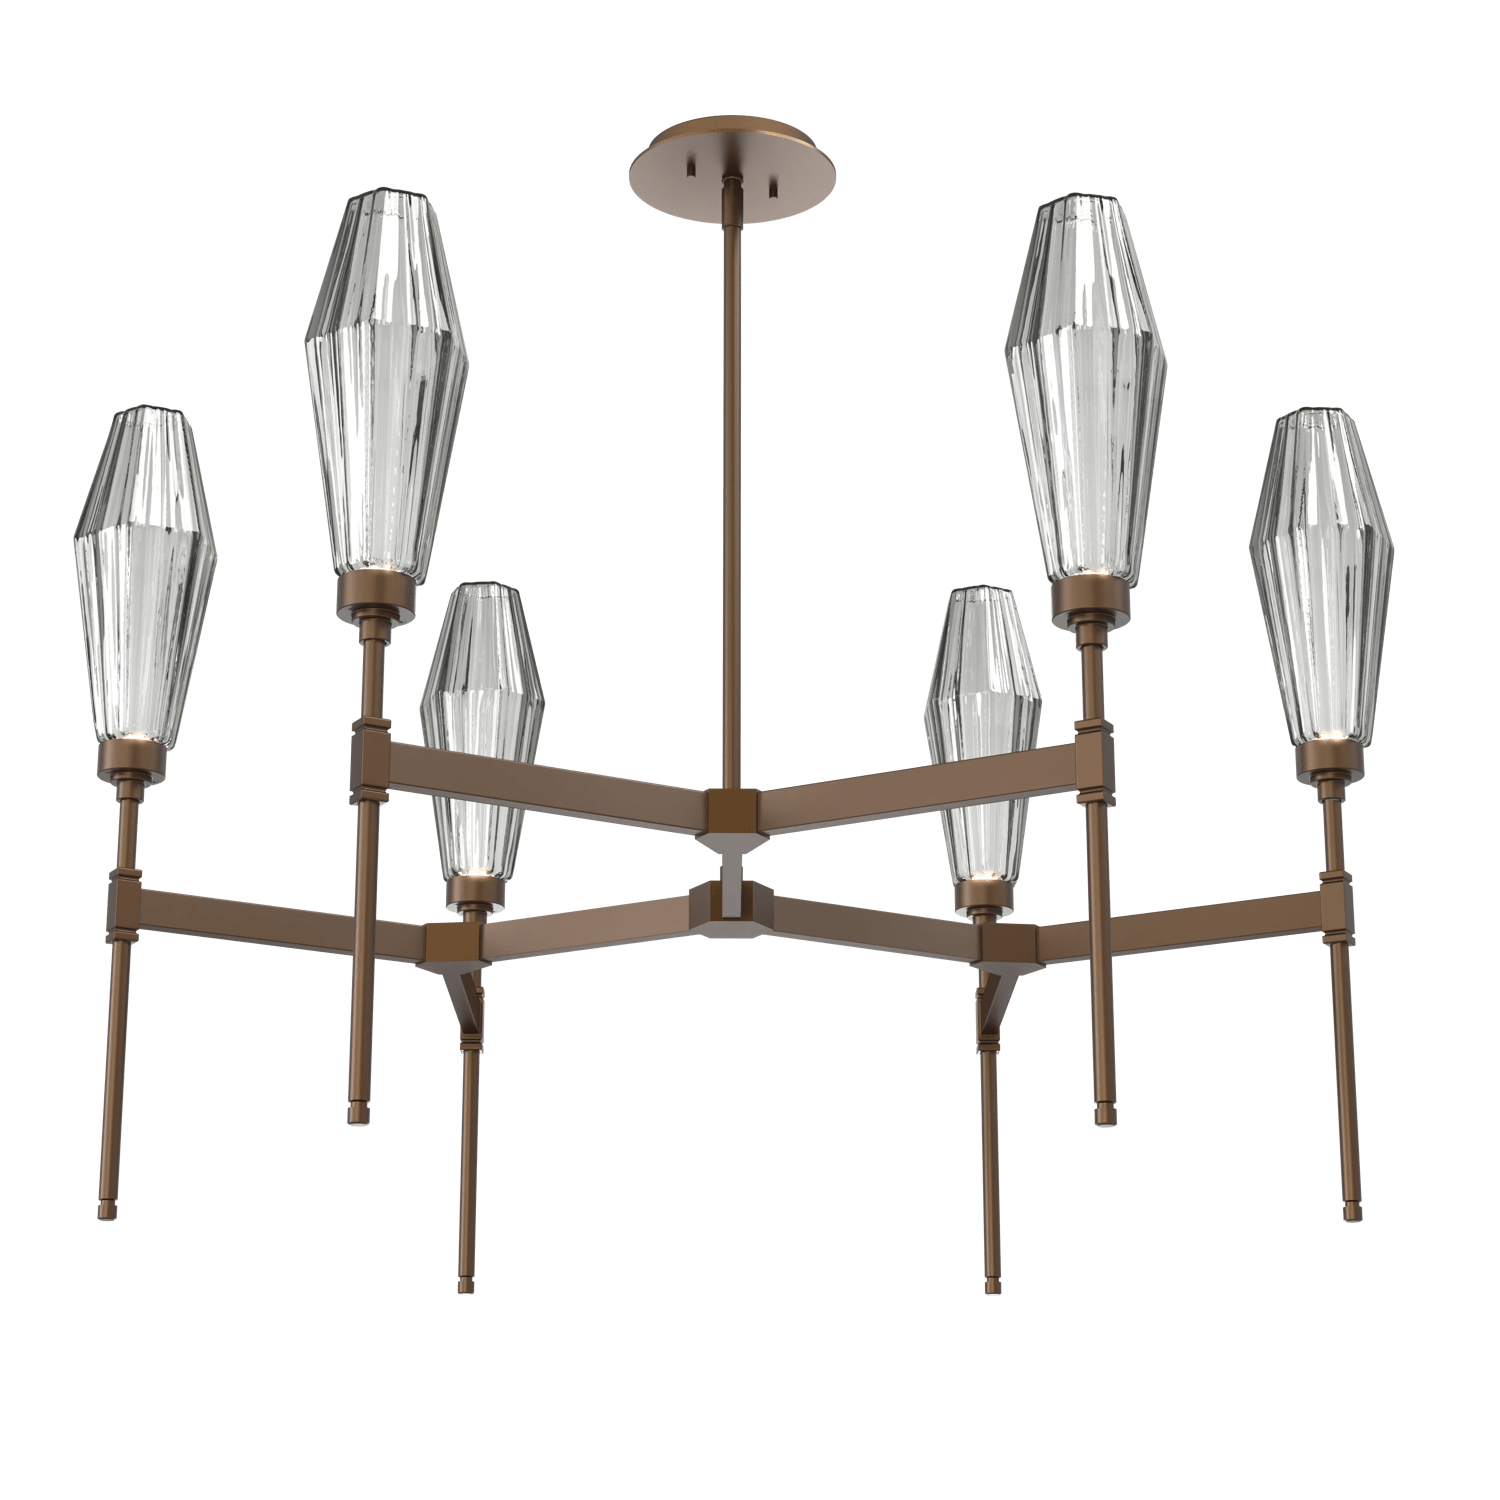 CHB0049-37-FB-RS-Hammerton-Studio-Aalto-37-inch-round-belvedere-chandelier-with-flat-bronze-finish-and-optic-ribbed-smoke-glass-shades-and-LED-lamping